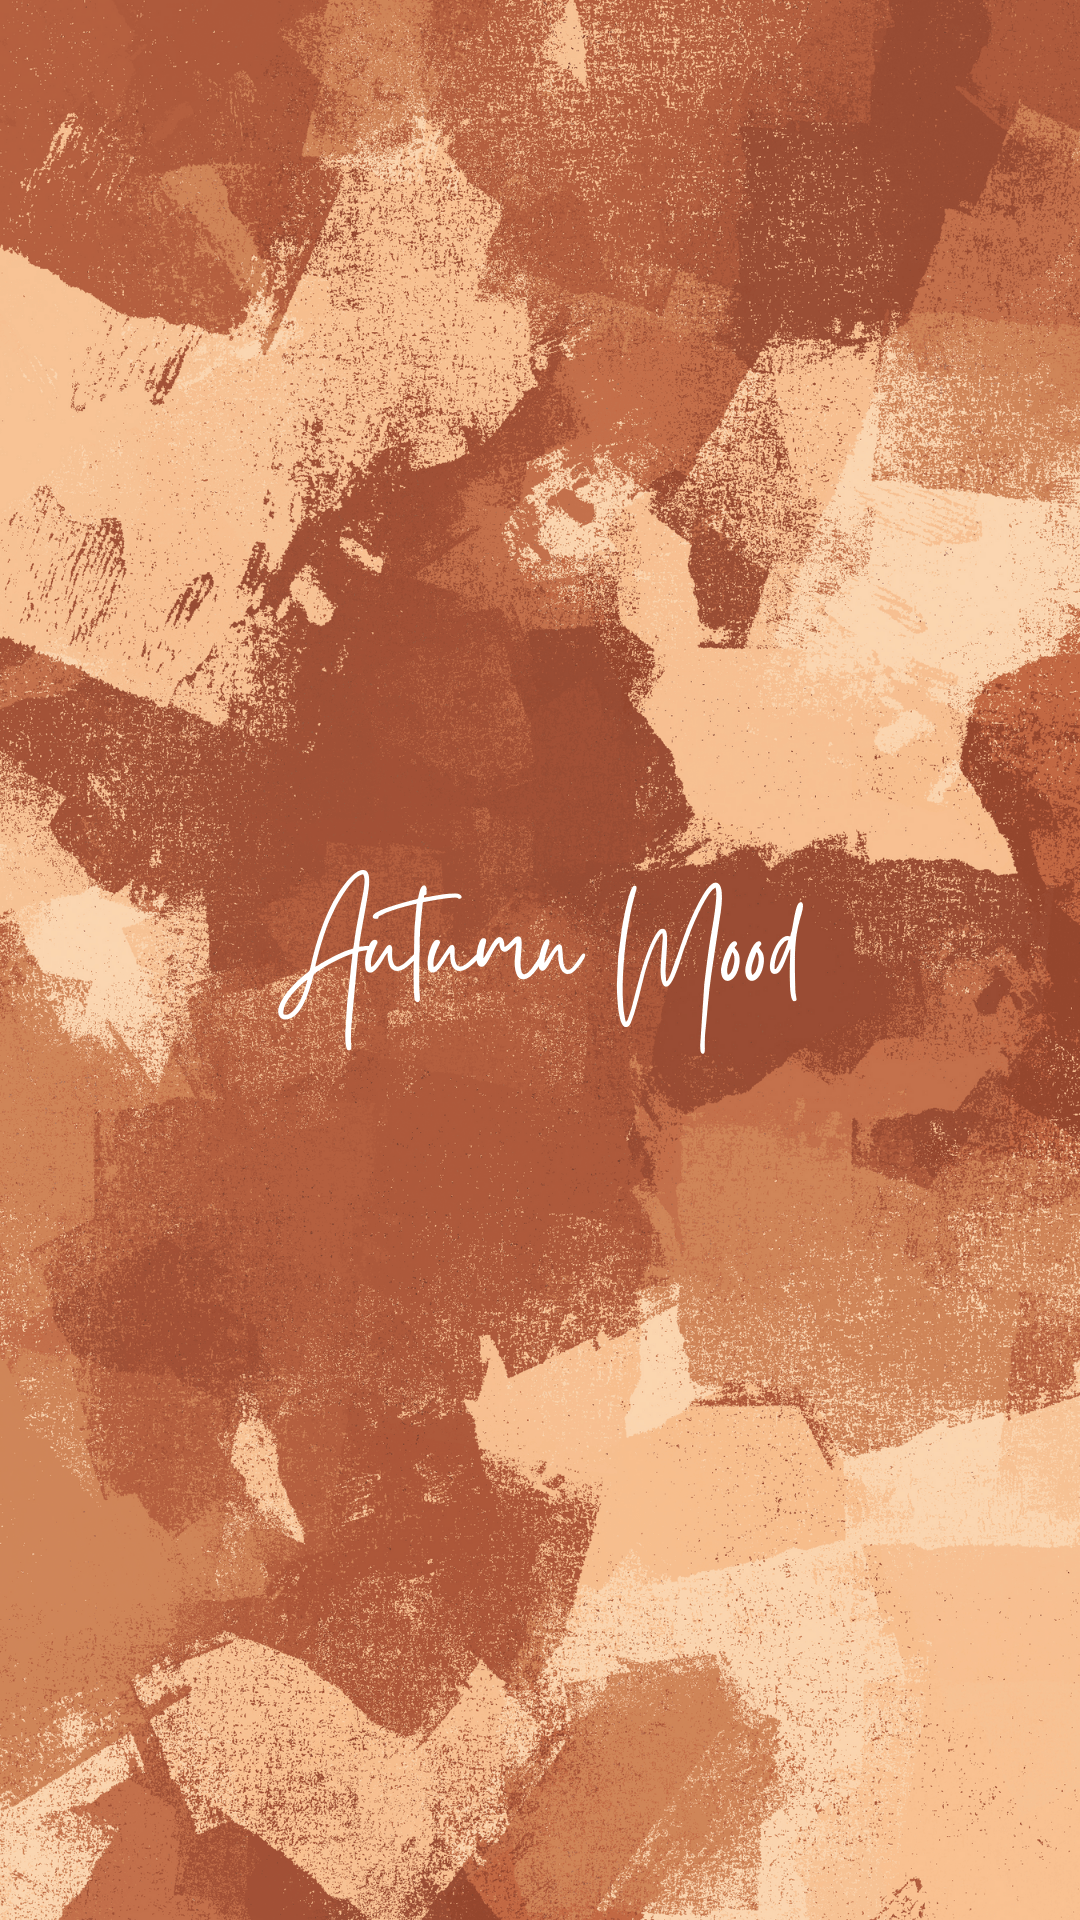 Autumn in mind - a brown and orange abstract painting - Warm, cozy